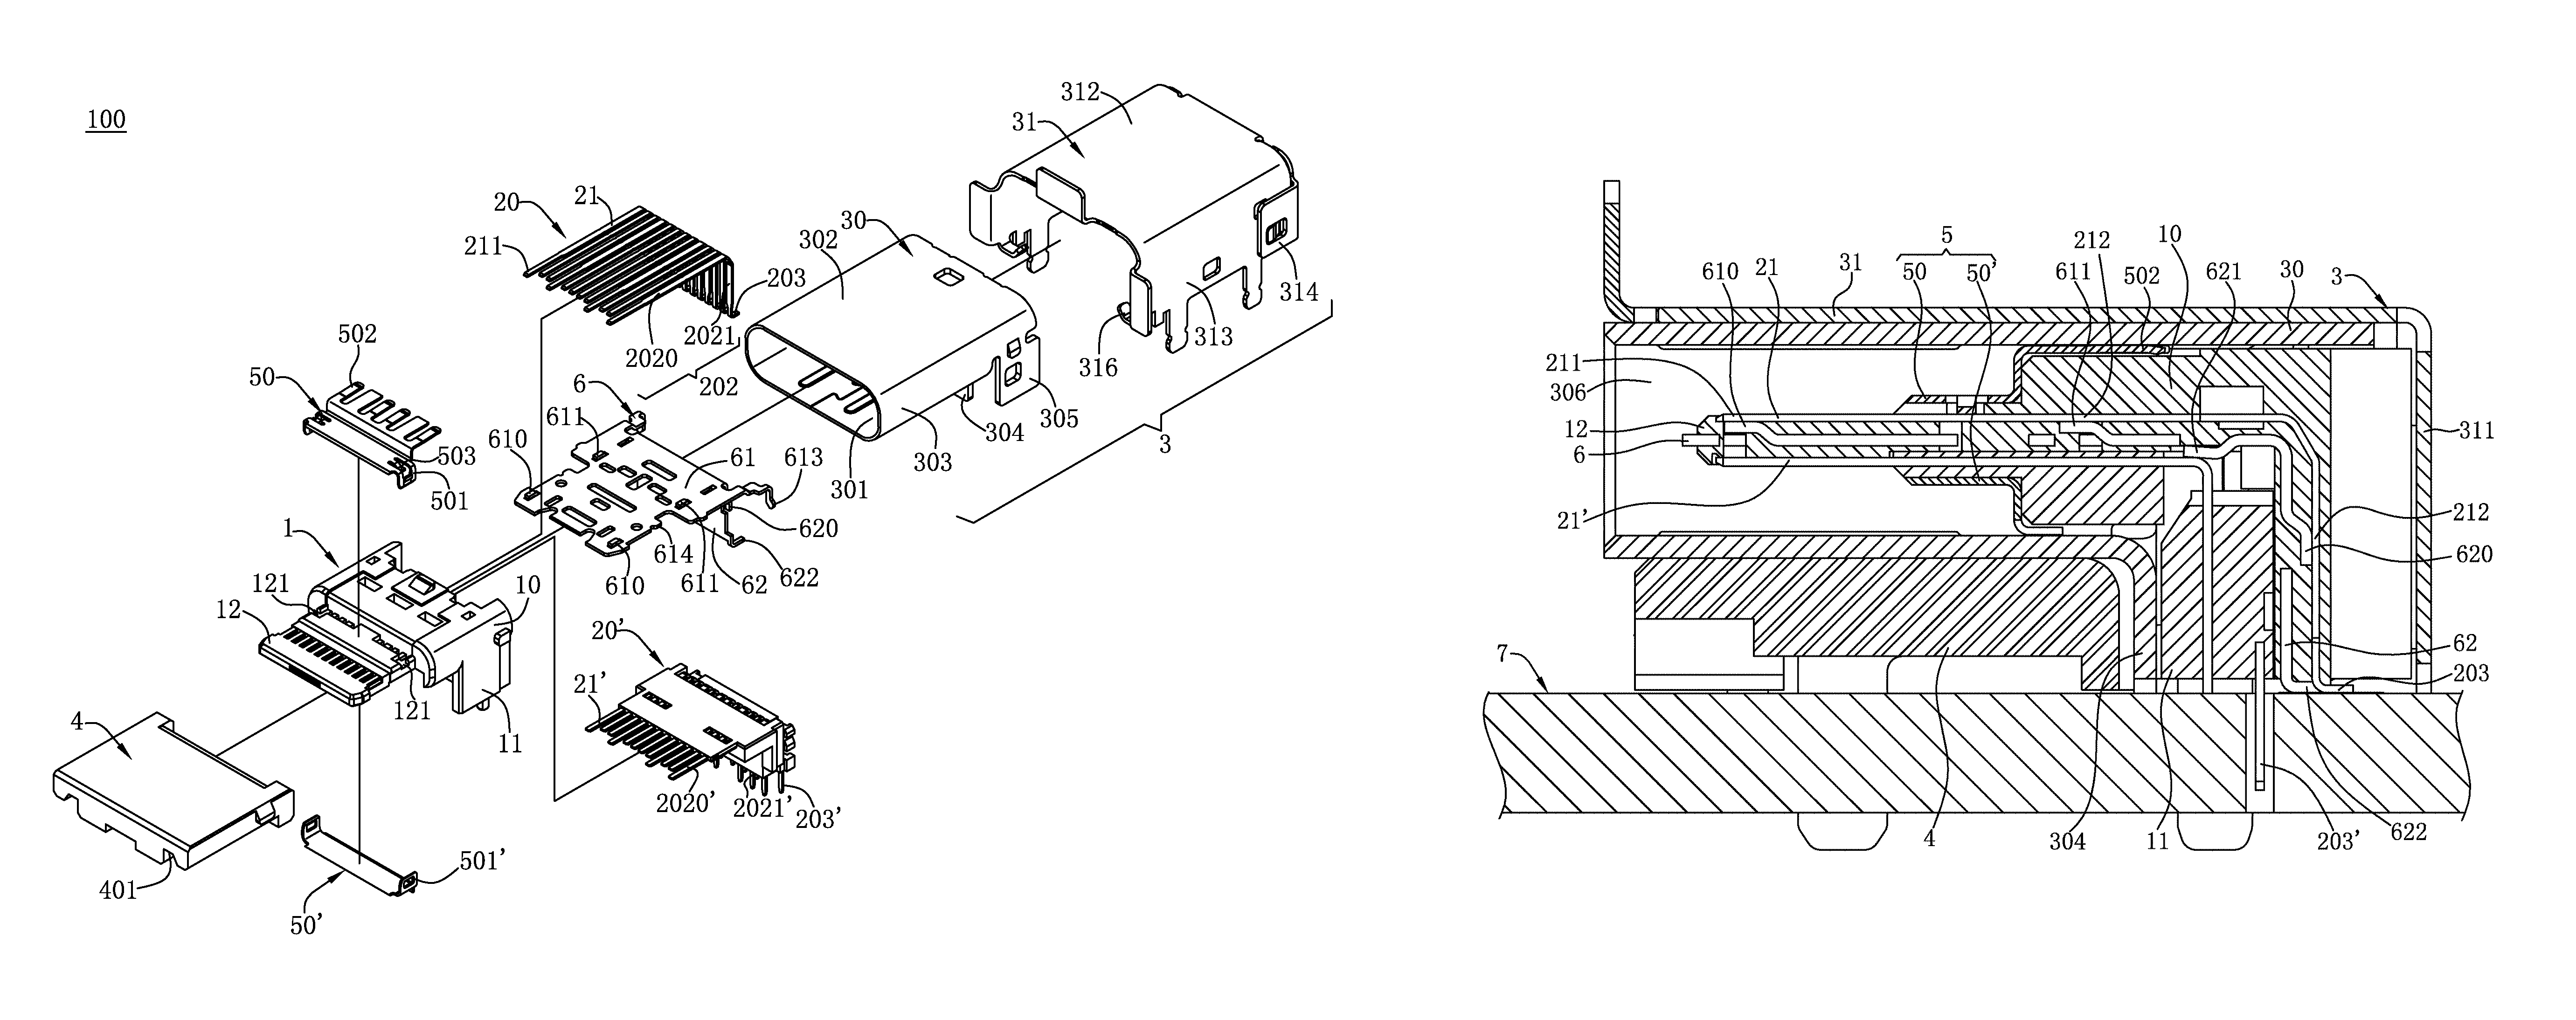 Electrical connector having a ground terminal with contact portions in contact with a shielding sheet